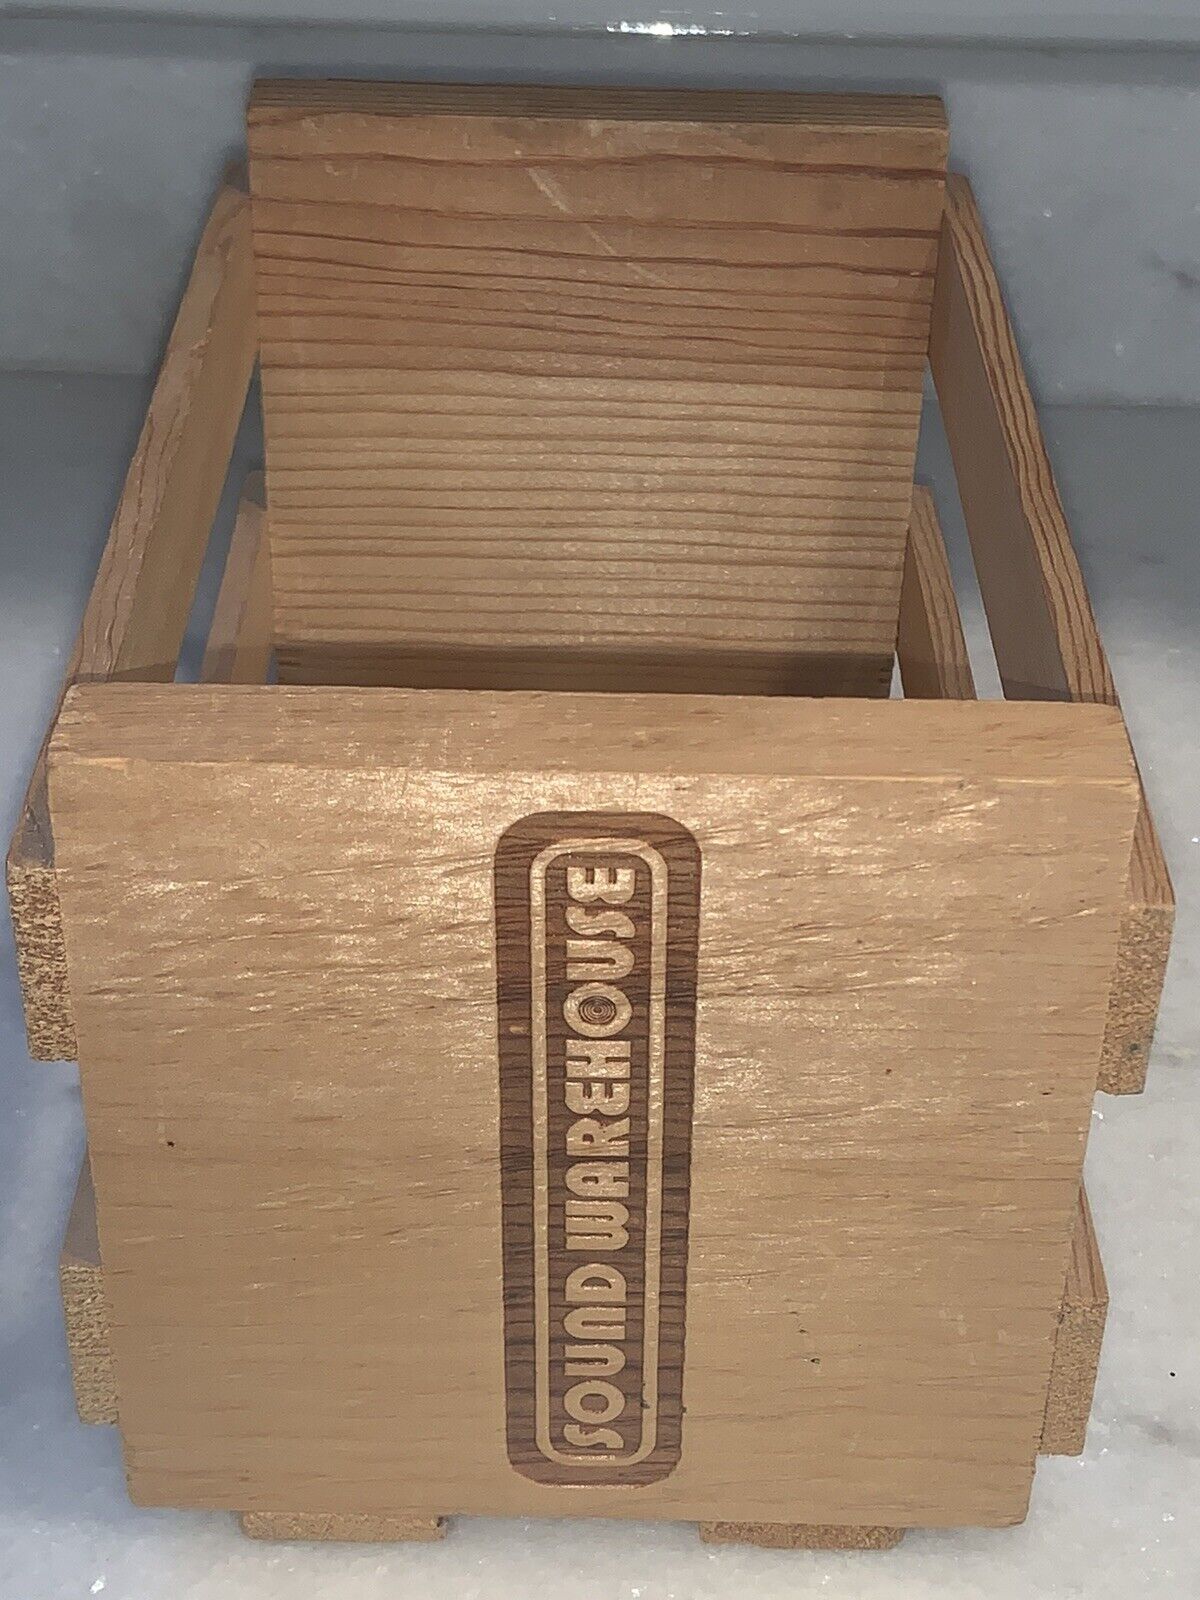 SOUND WAREHOUSE CD STORAGE HOLDER WOODEN CRATE WITH AUDIO CD CAPACITY VINTAGE